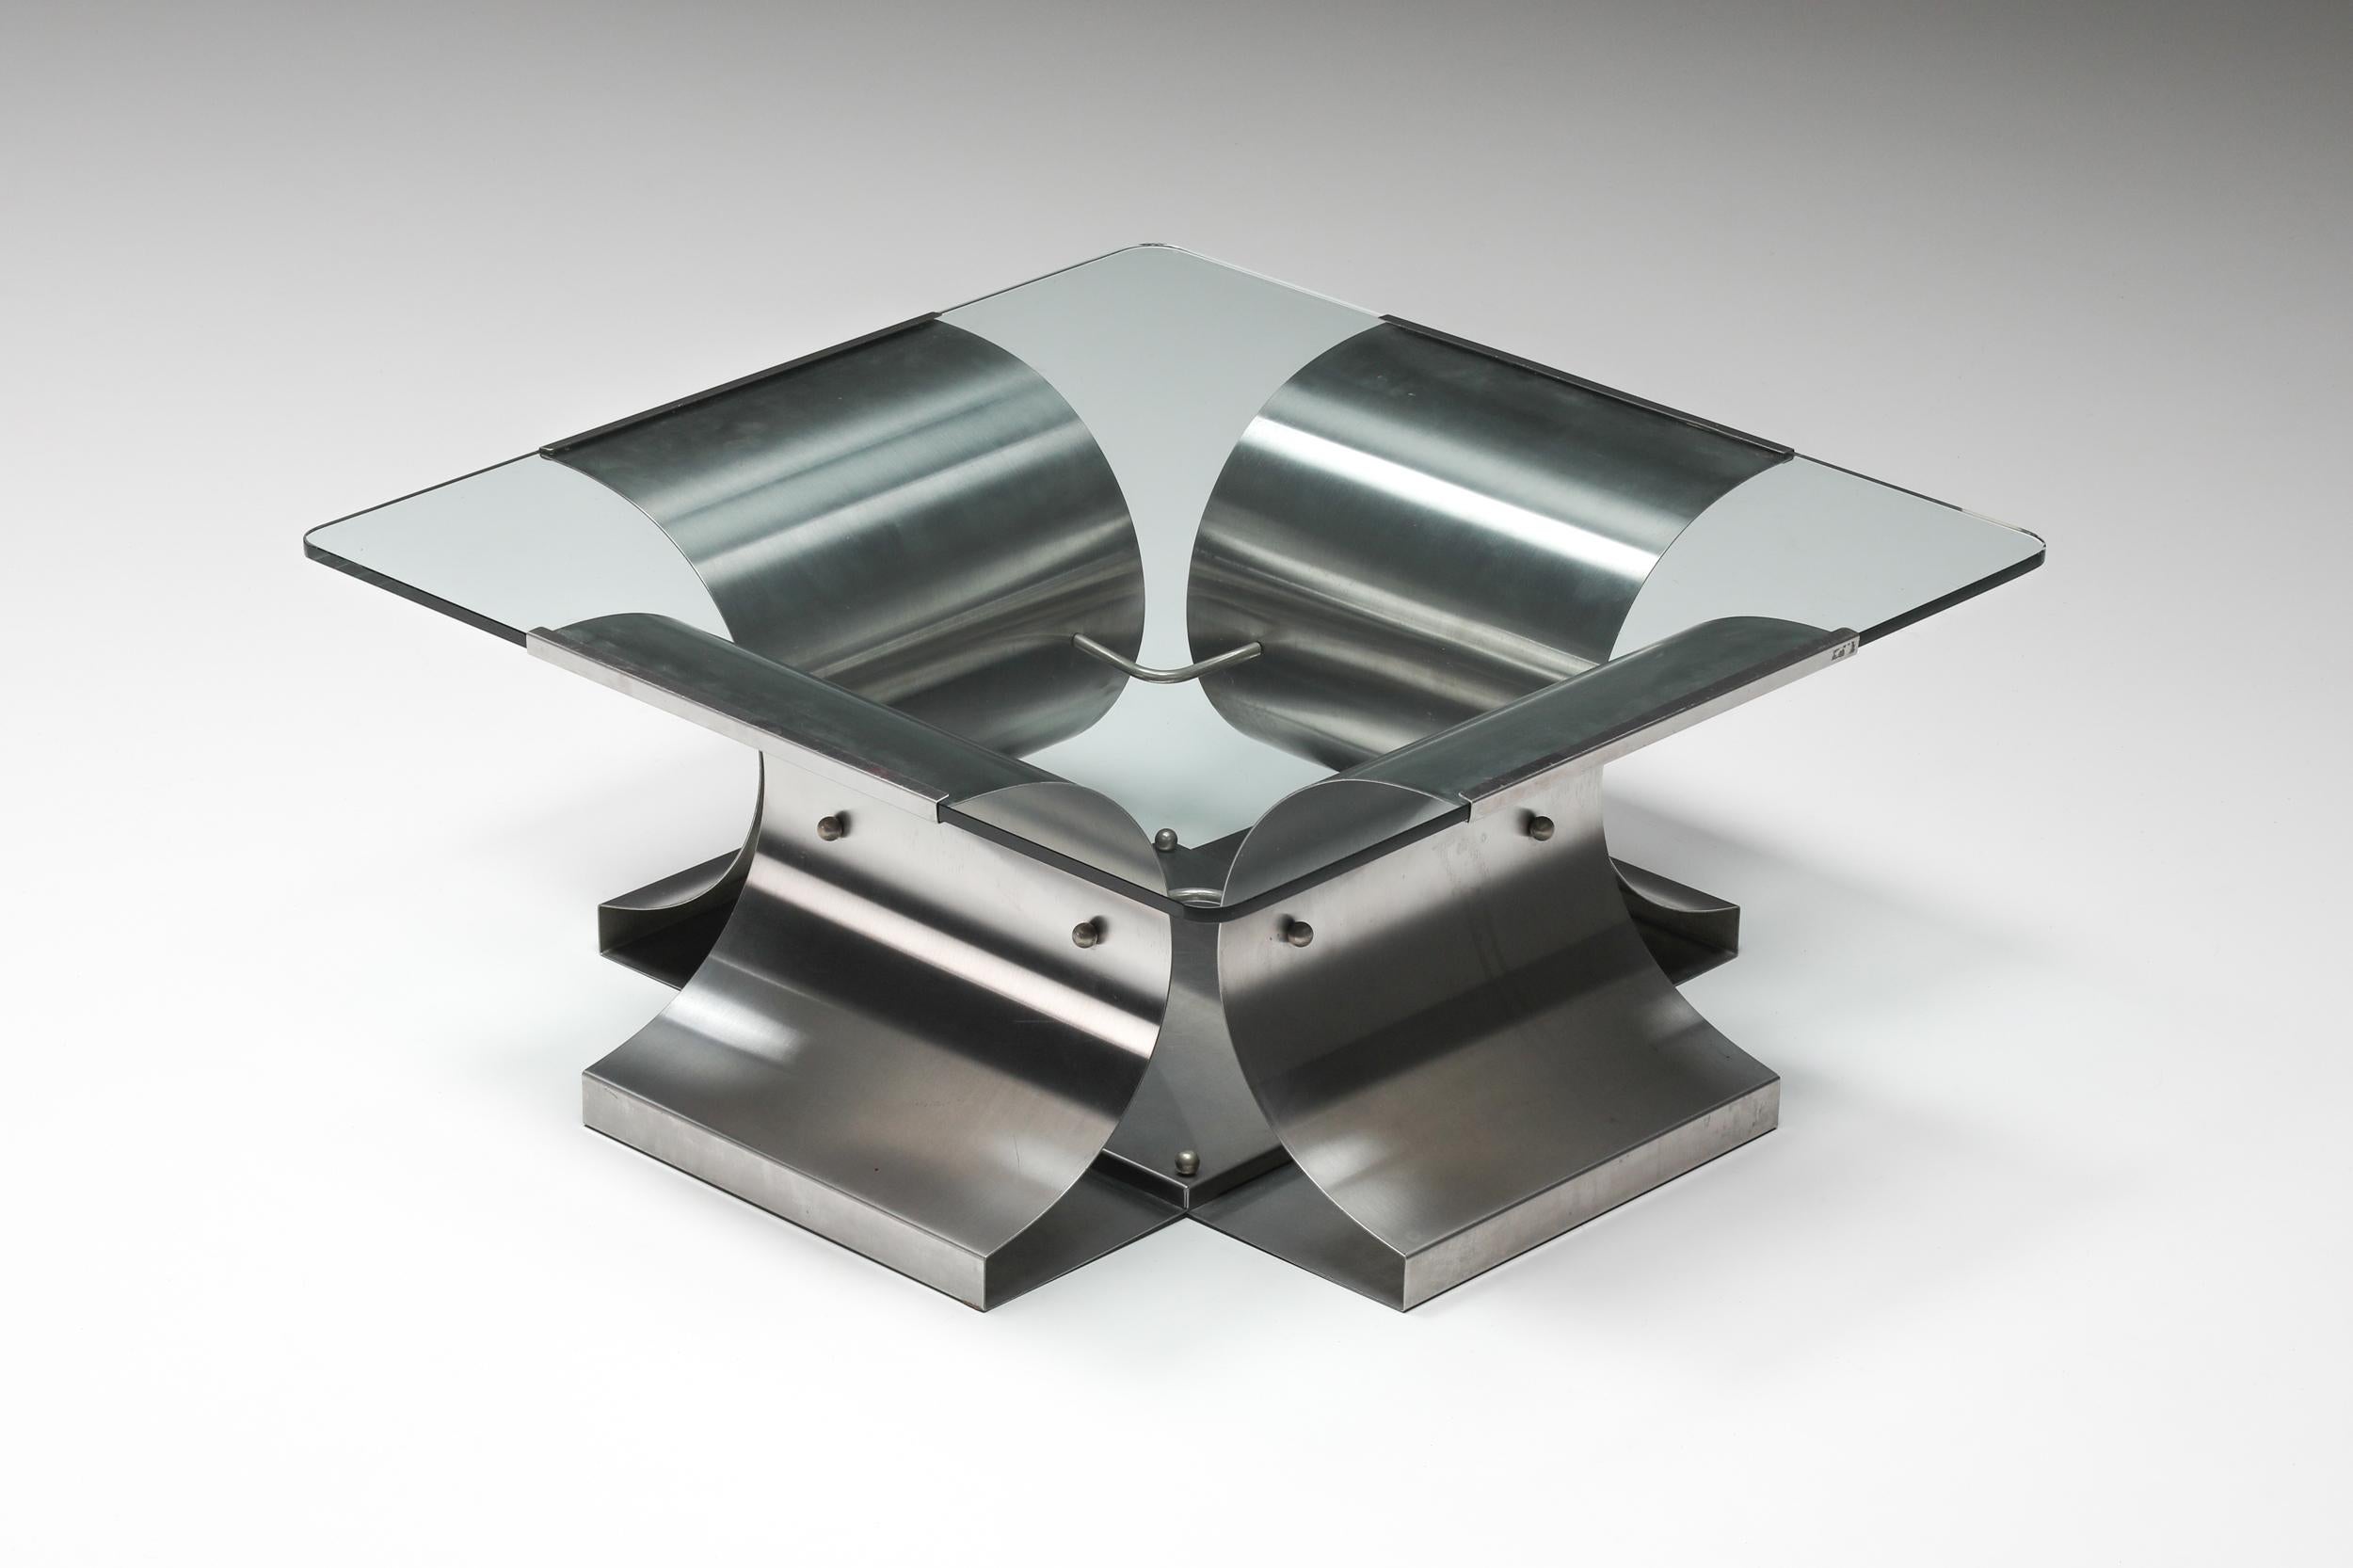 Mid-Century Modern Oscar Niemeyer Inspired Square Glass & Metal Coffee Table, Architectural, 1970's